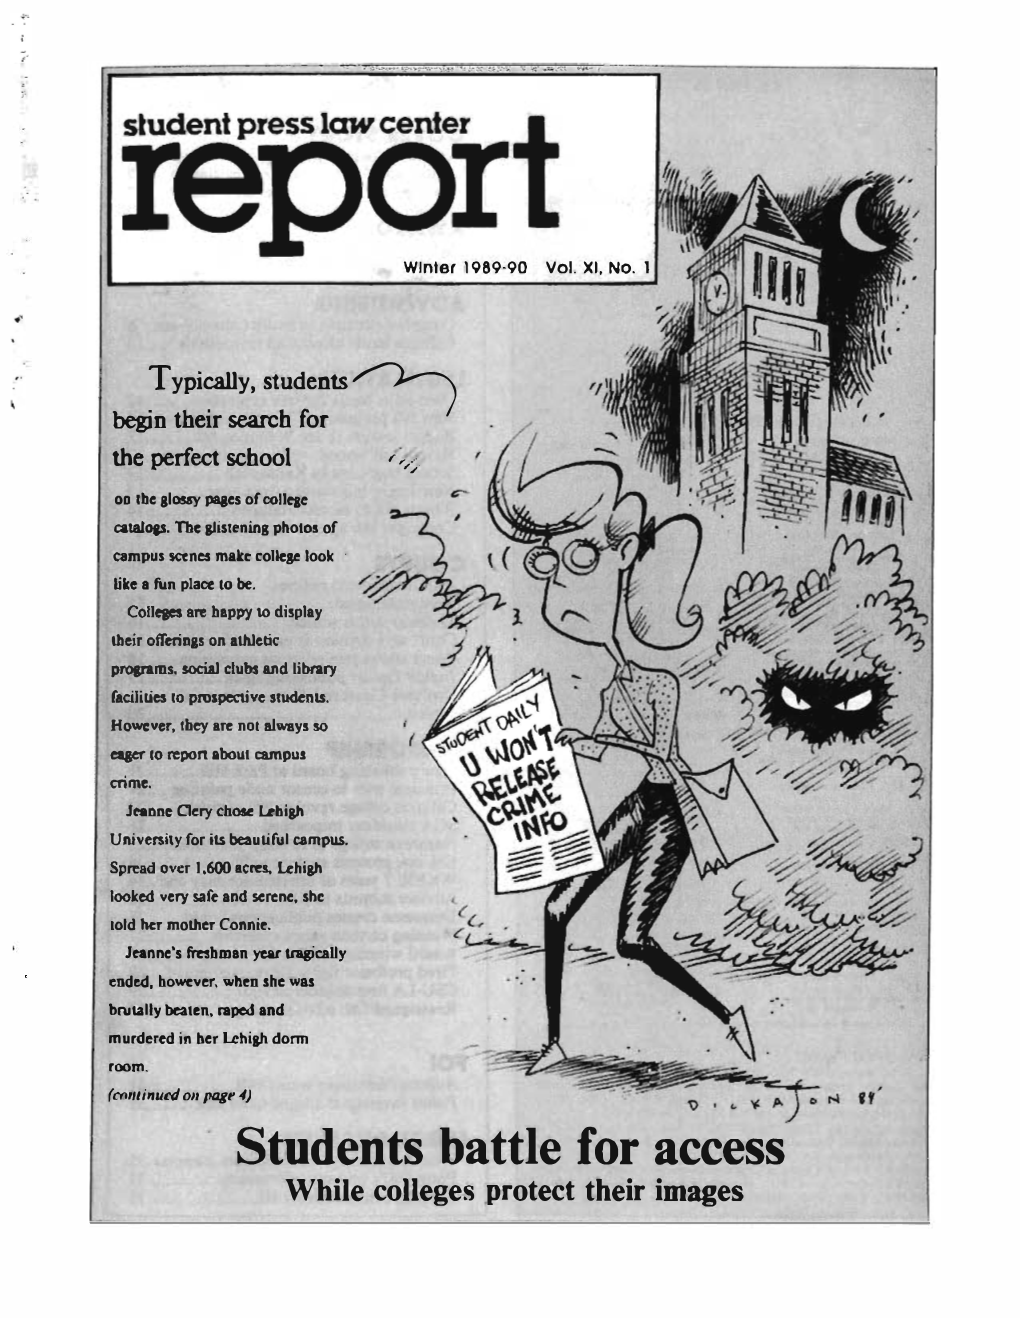 Students Battle for Access While Colleges Protect Their Images CO-EDITORS Mary Reed CONTENTS Ohto Uni".Rsity